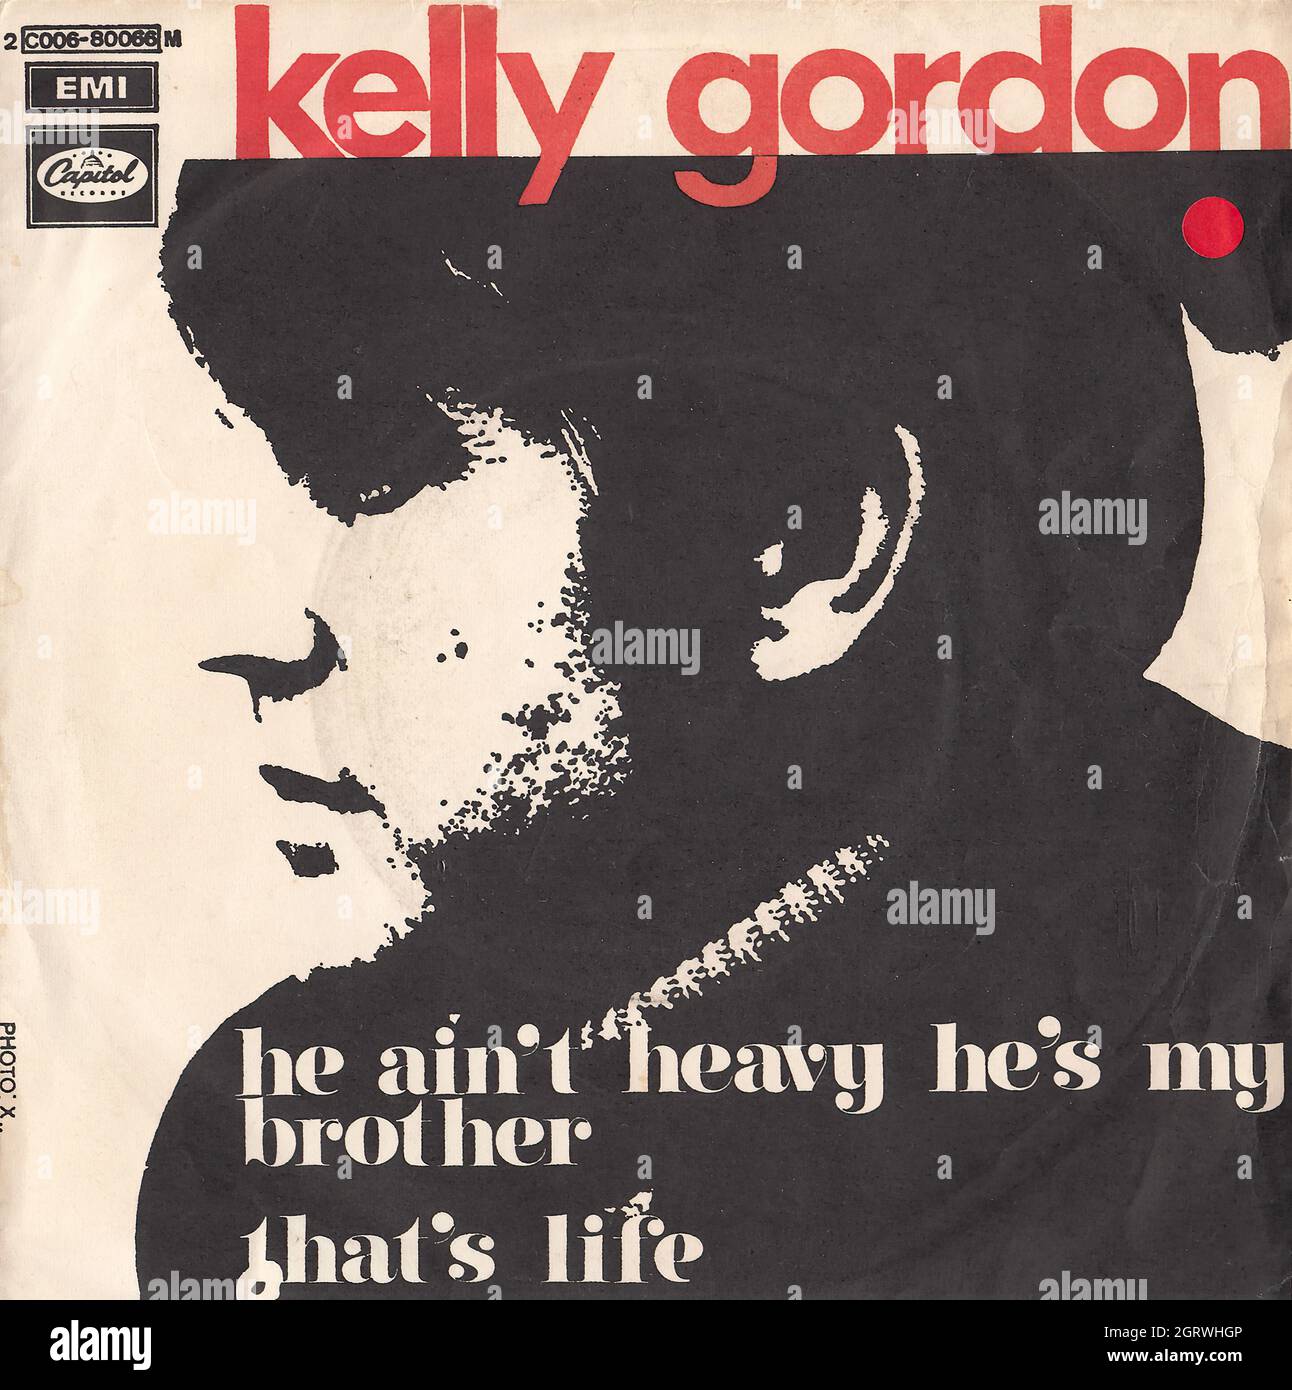 Kelly Gordon - He ain't heavy, he's my brother - That's life 45rpm - Vintage Vinyl Record Cover Stock Photo